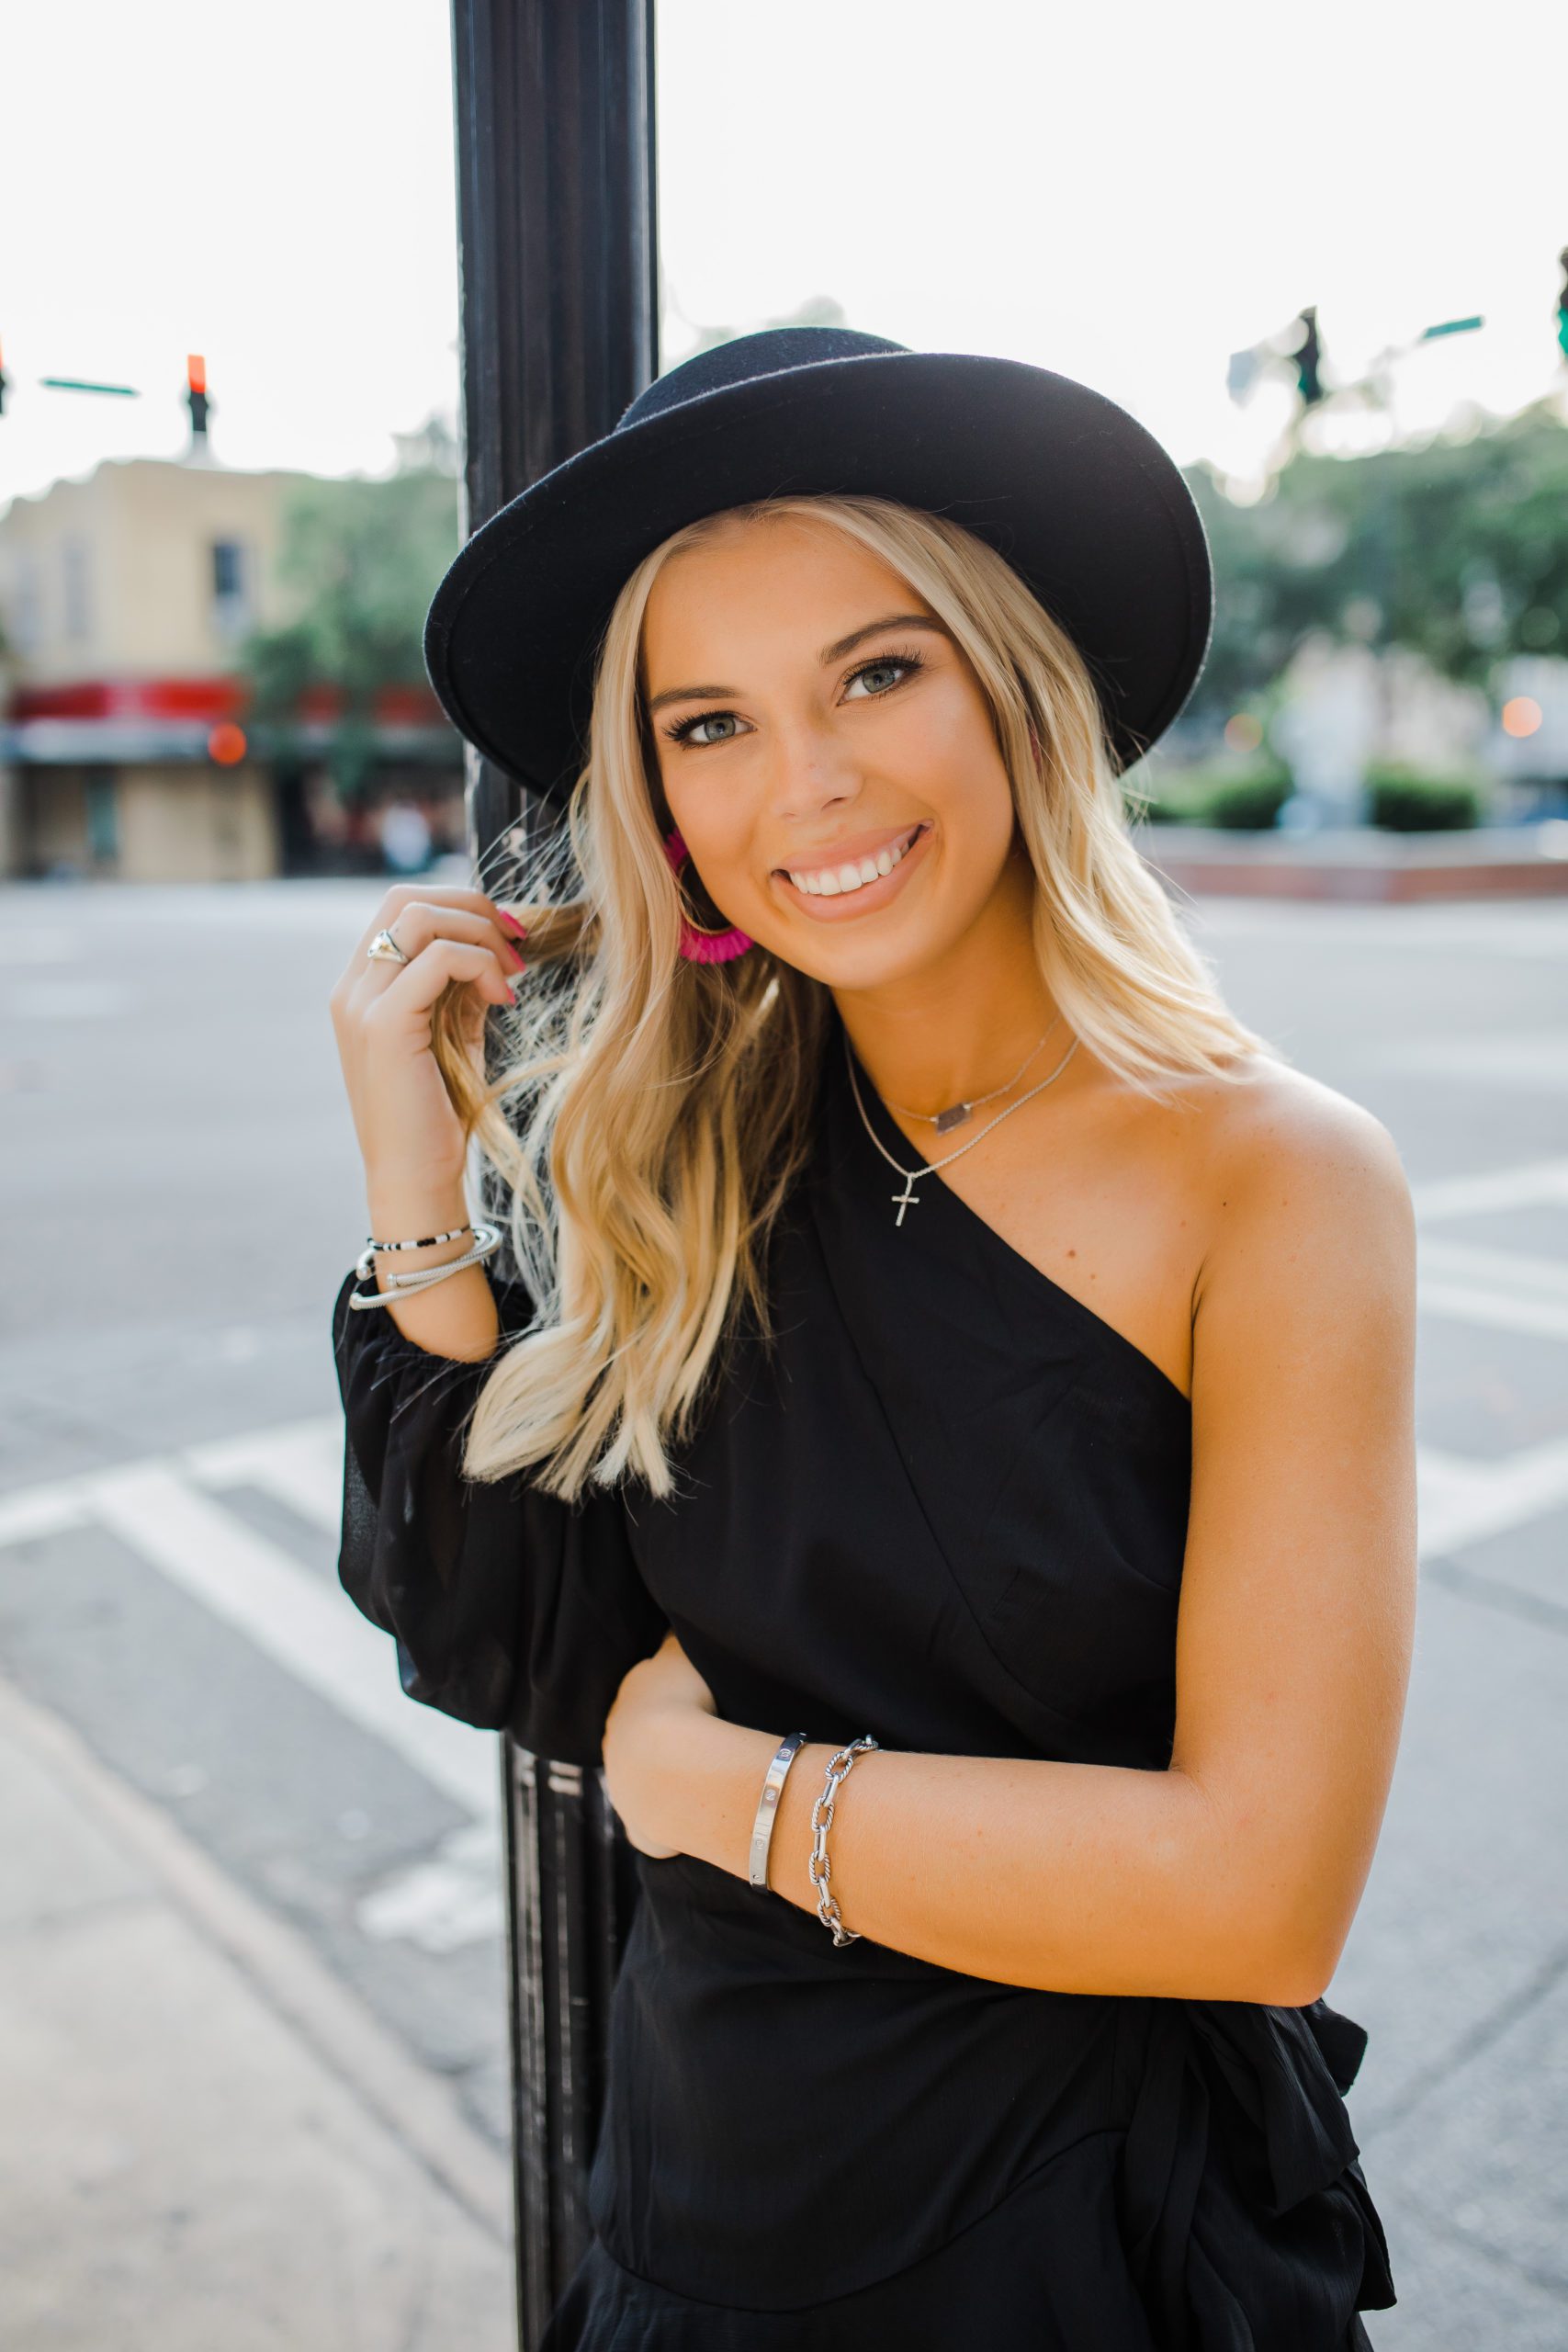 Augusta photographer photographs high school senior pictures of girl in a black dress and black wide brimmed hat